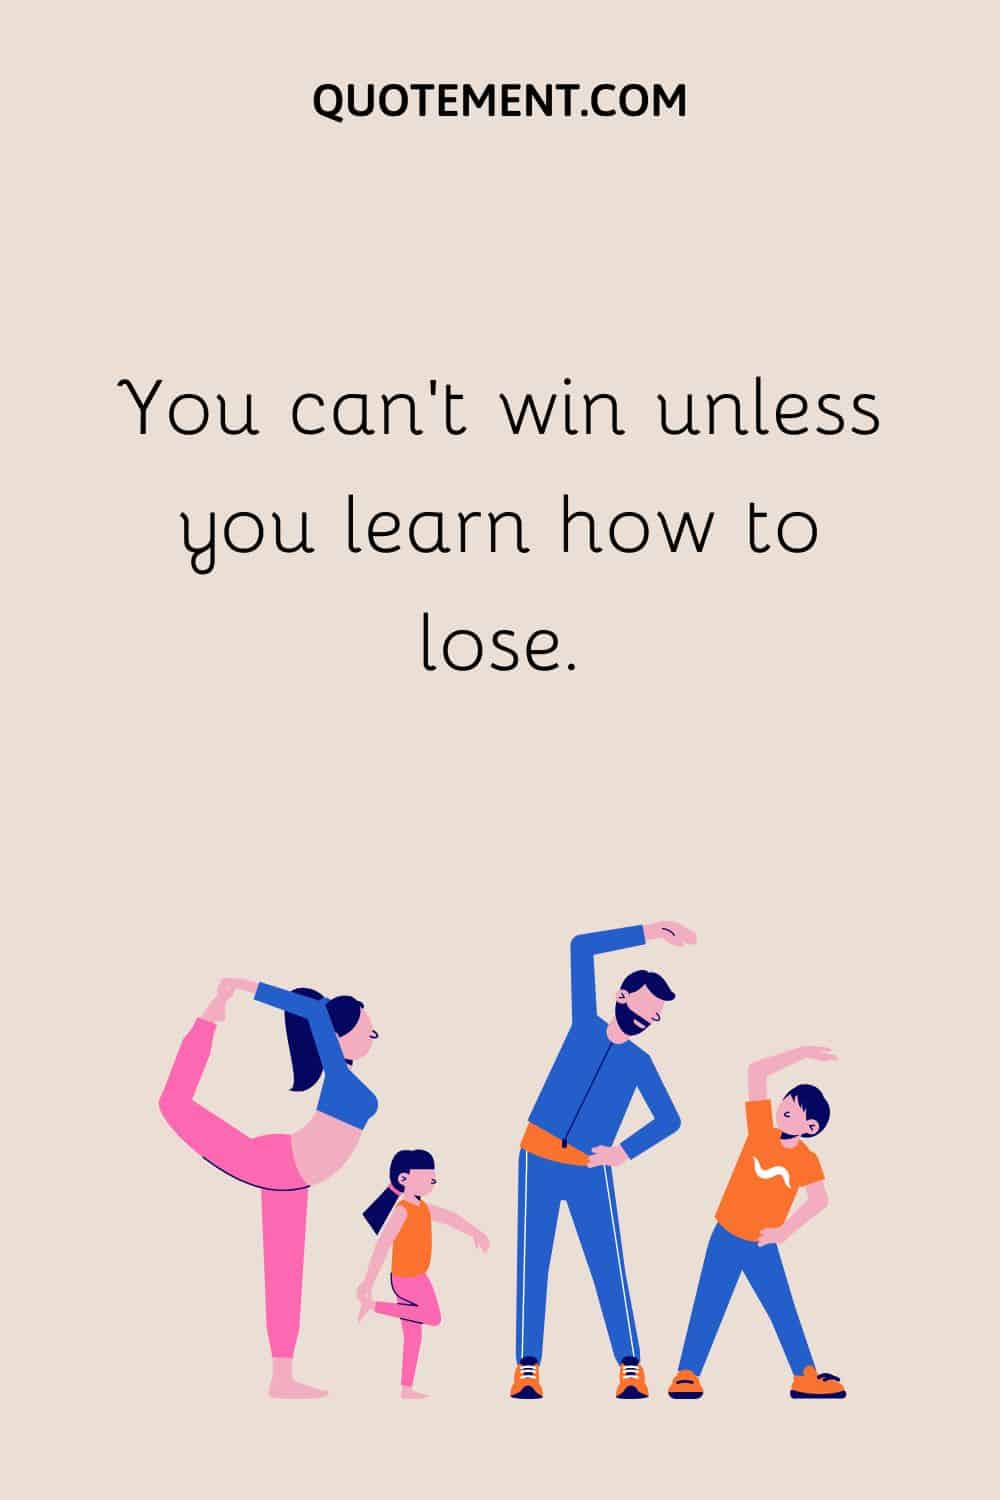 You can’t win unless you learn how to lose